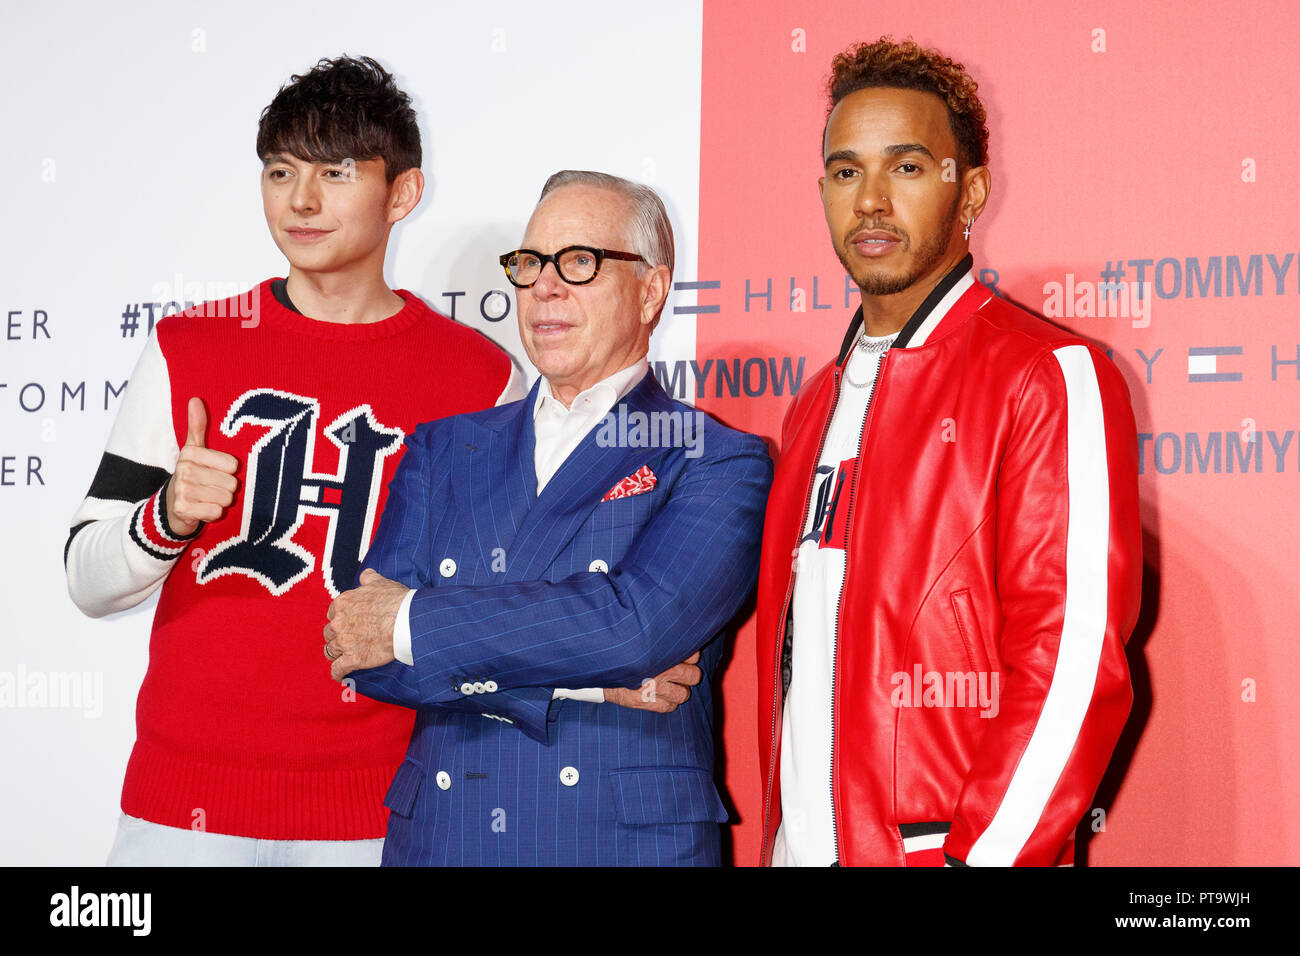 Tokyo, Japan. 8th October, 2018. (L to R) Japanese TV personality Harry  Sugiyama, American fashion designer Tommy Hilfiger and F1 racer Lewis  Hamilton pose for the cameras during Tokyo Icons event on